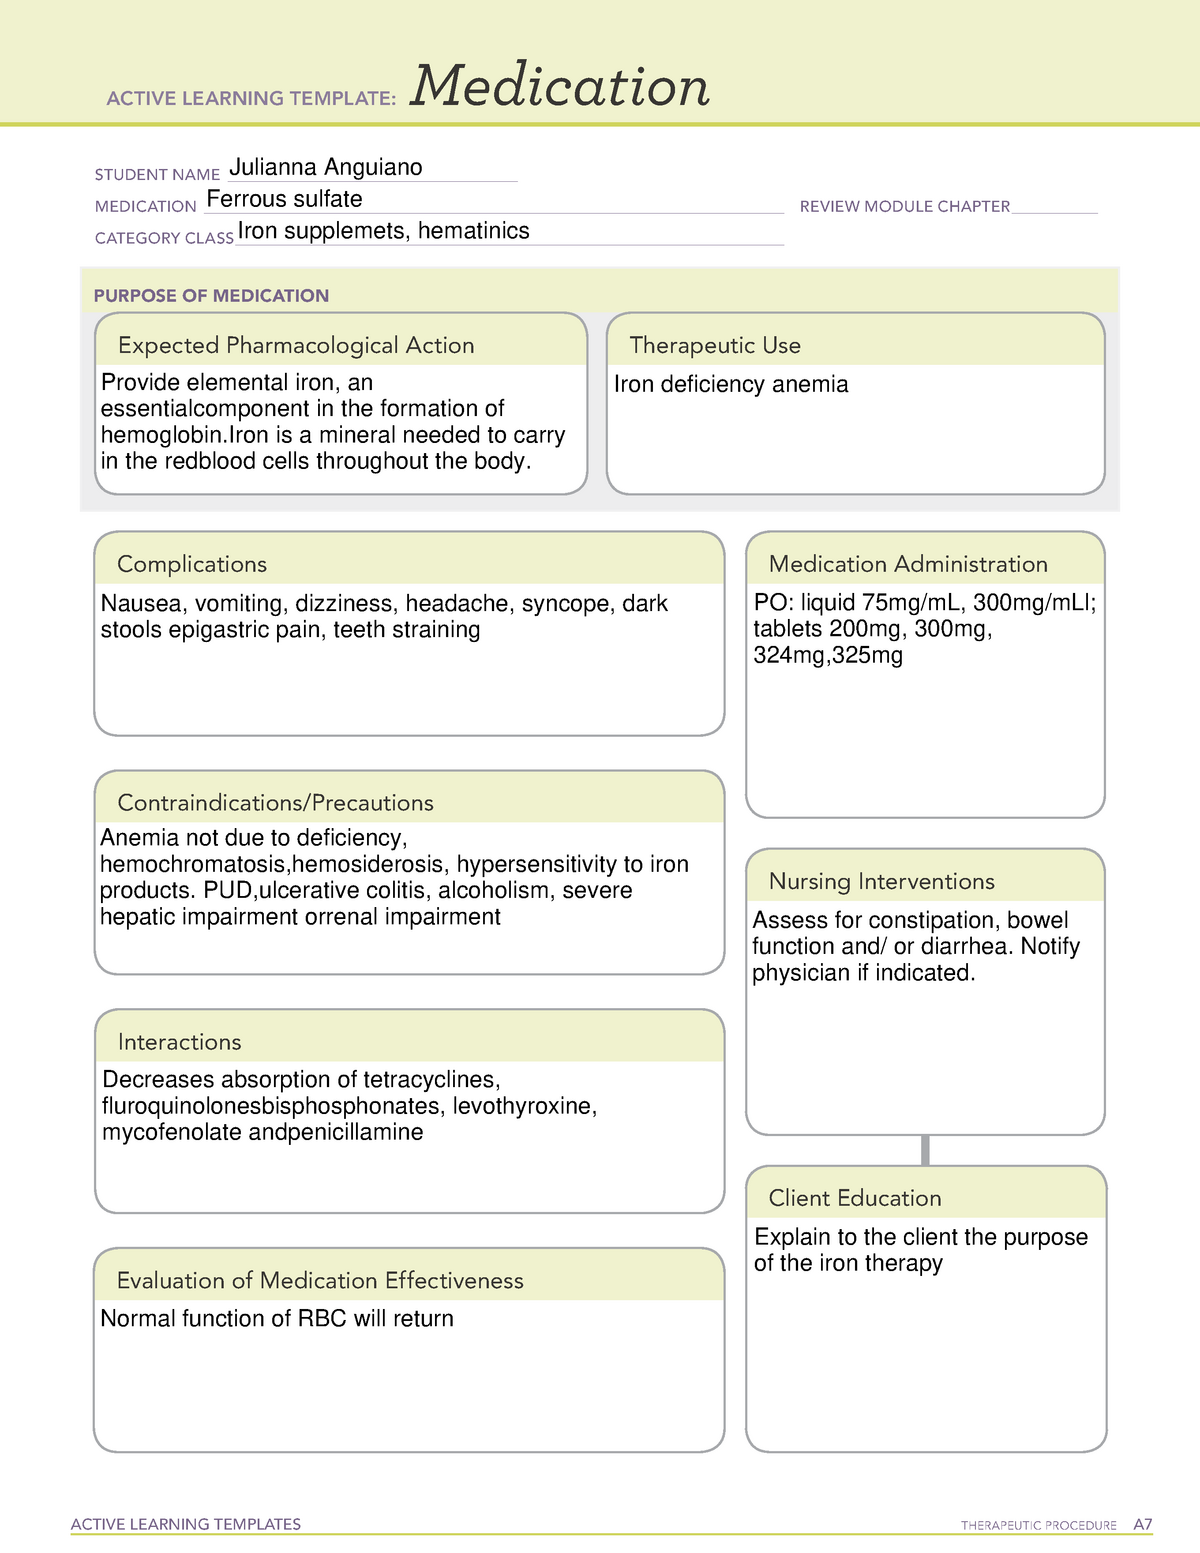 Ferrous sulfate Medication template ATI ACTIVE LEARNING TEMPLATES